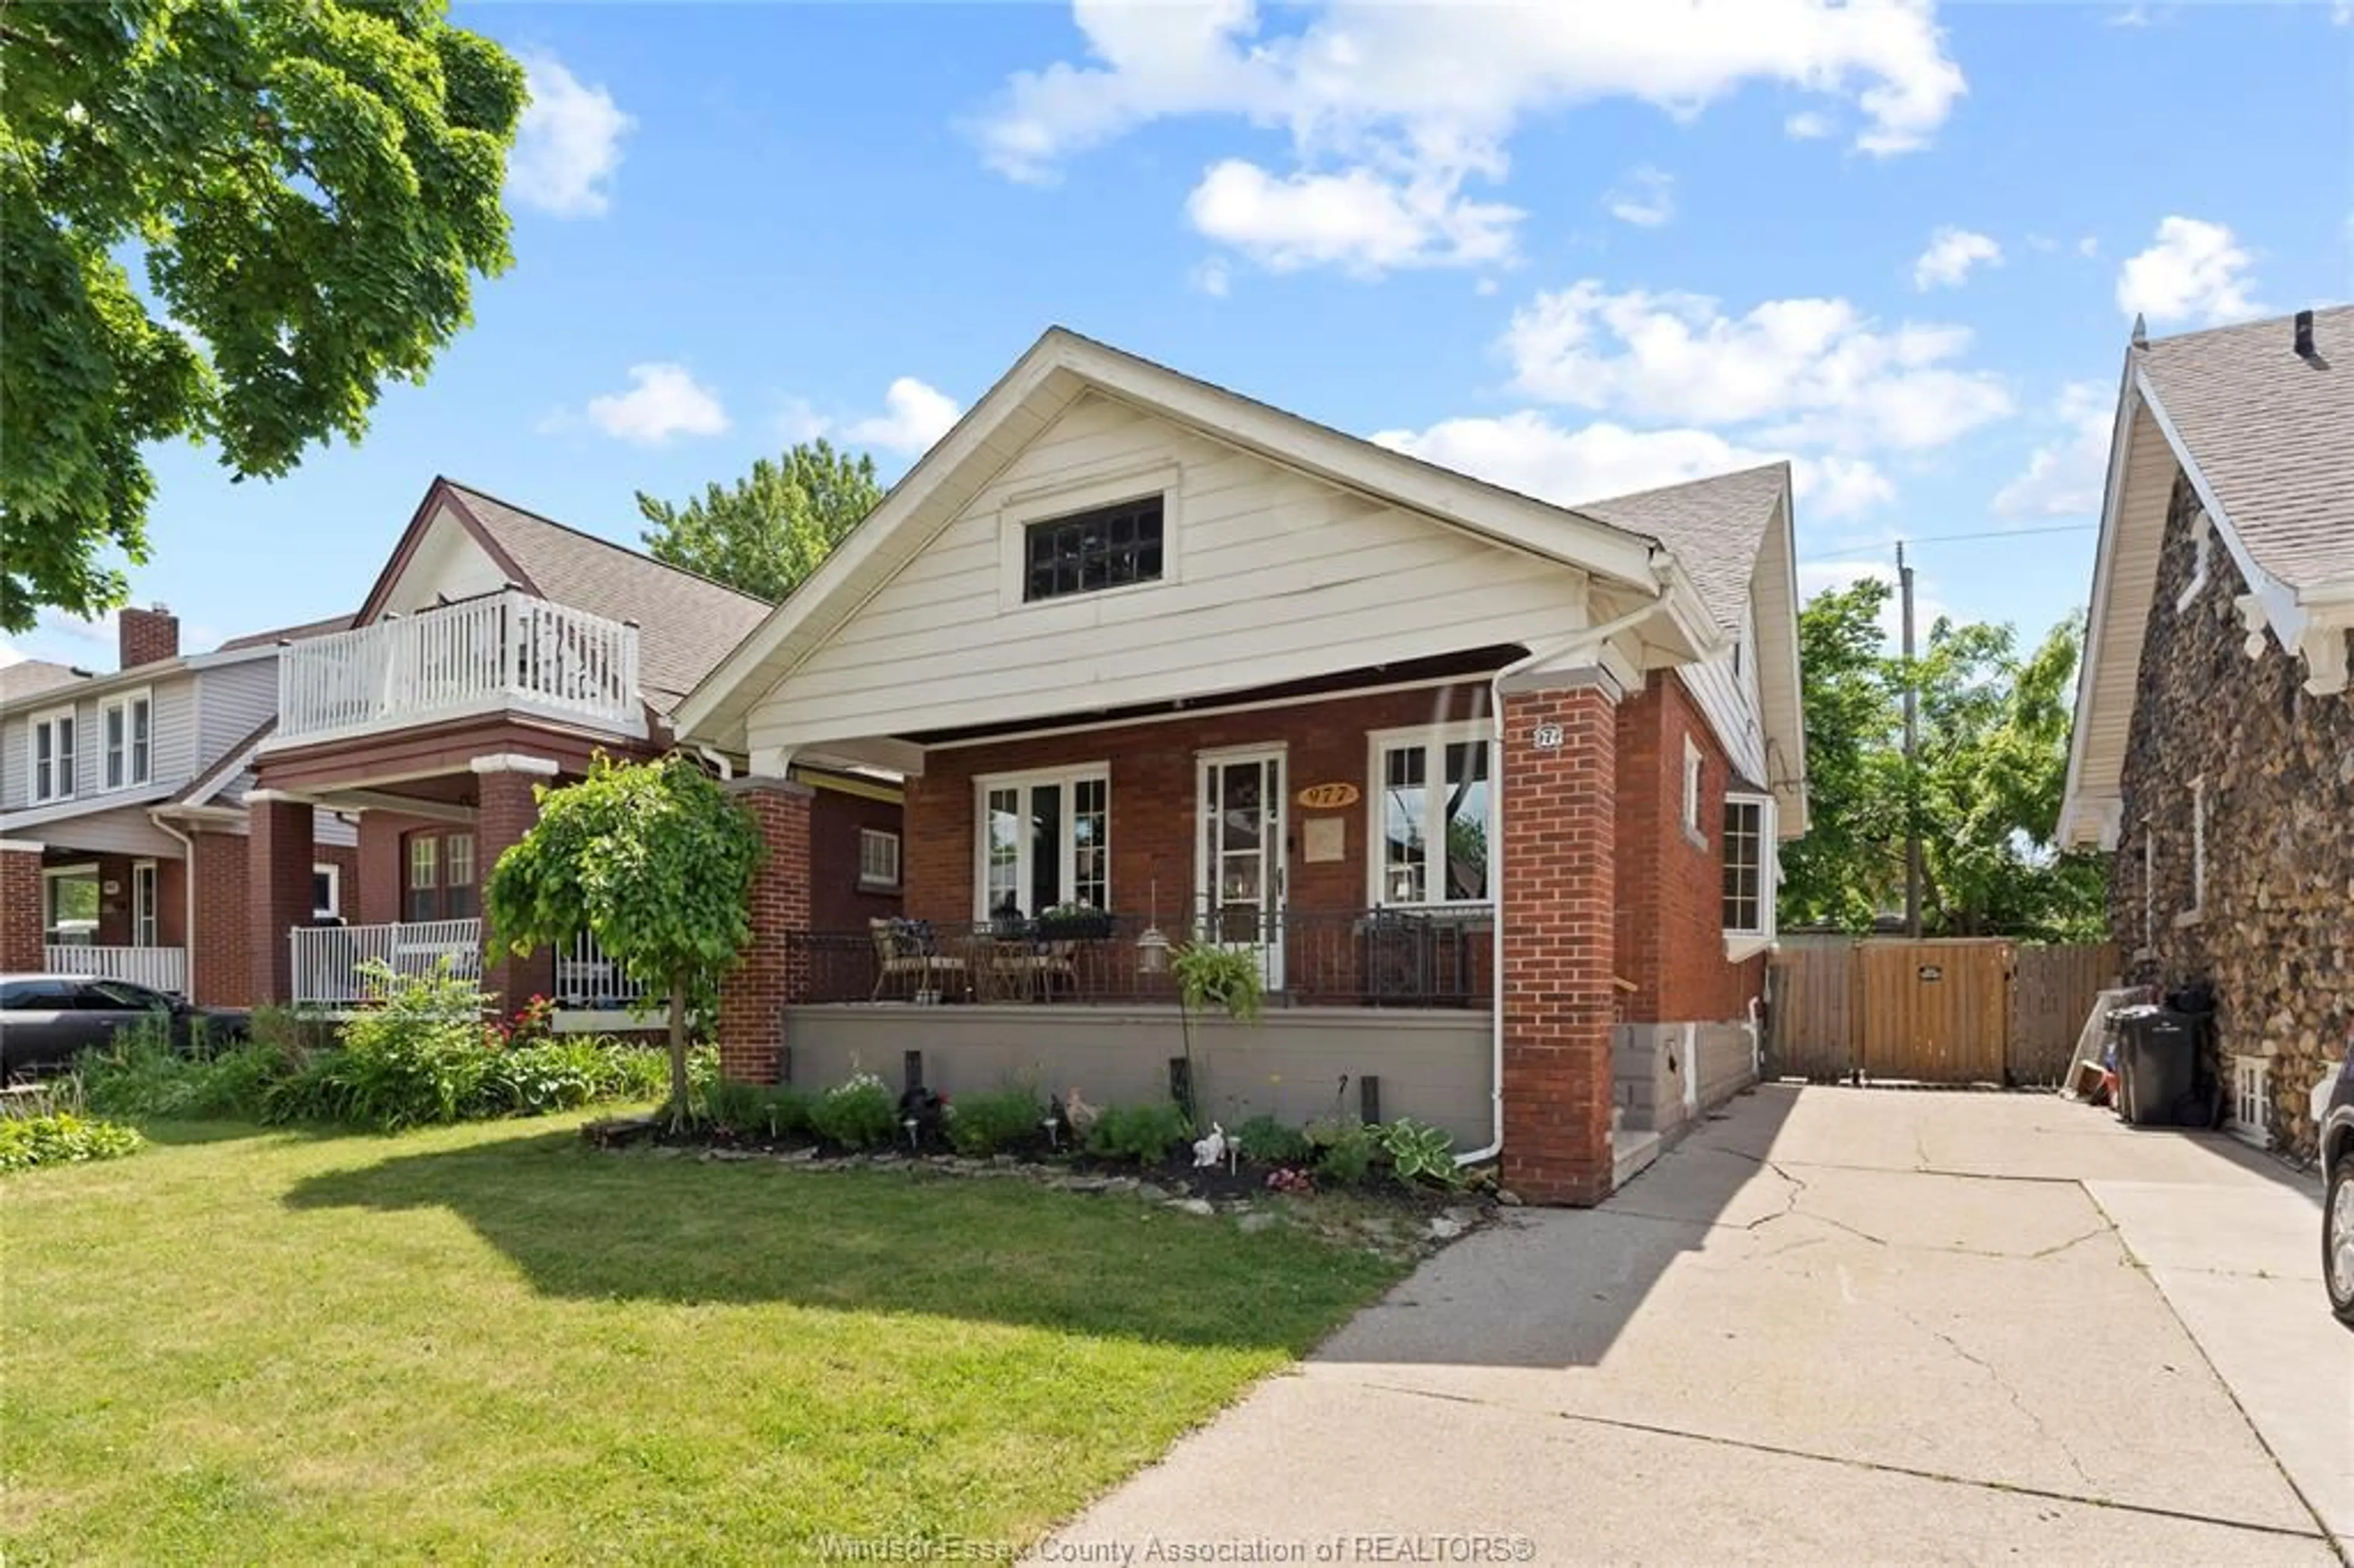 Home with brick exterior material for 977 LAWRENCE, Windsor Ontario N8Y 3Z9